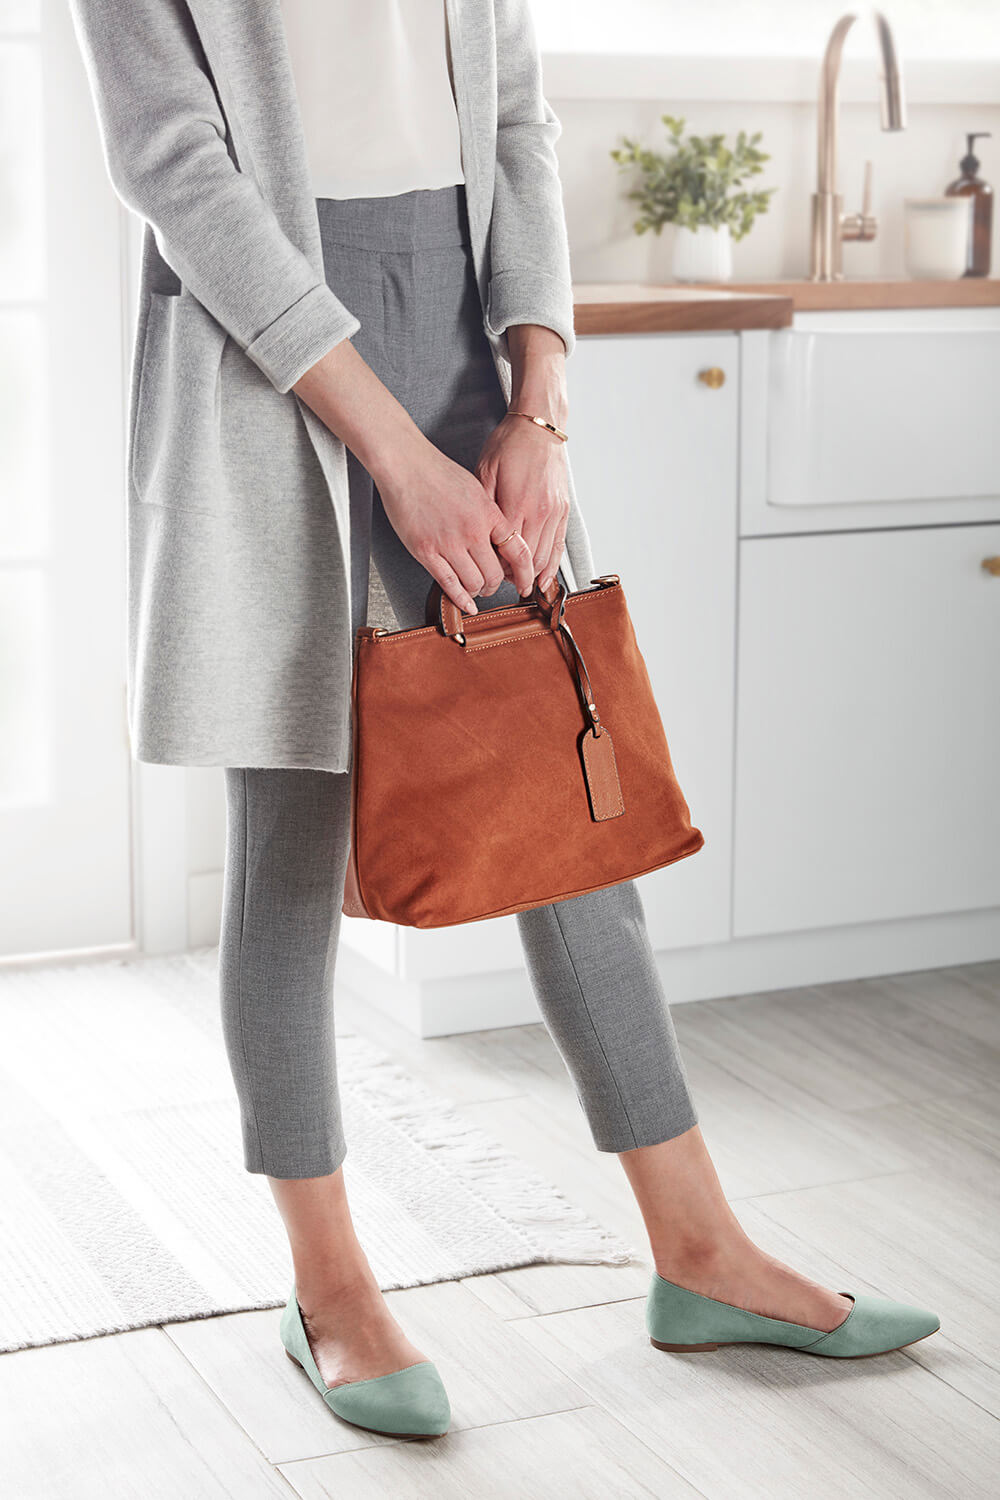 A woman dressed in gray pants, holding an orange purse in her hands, standing in her kitchen